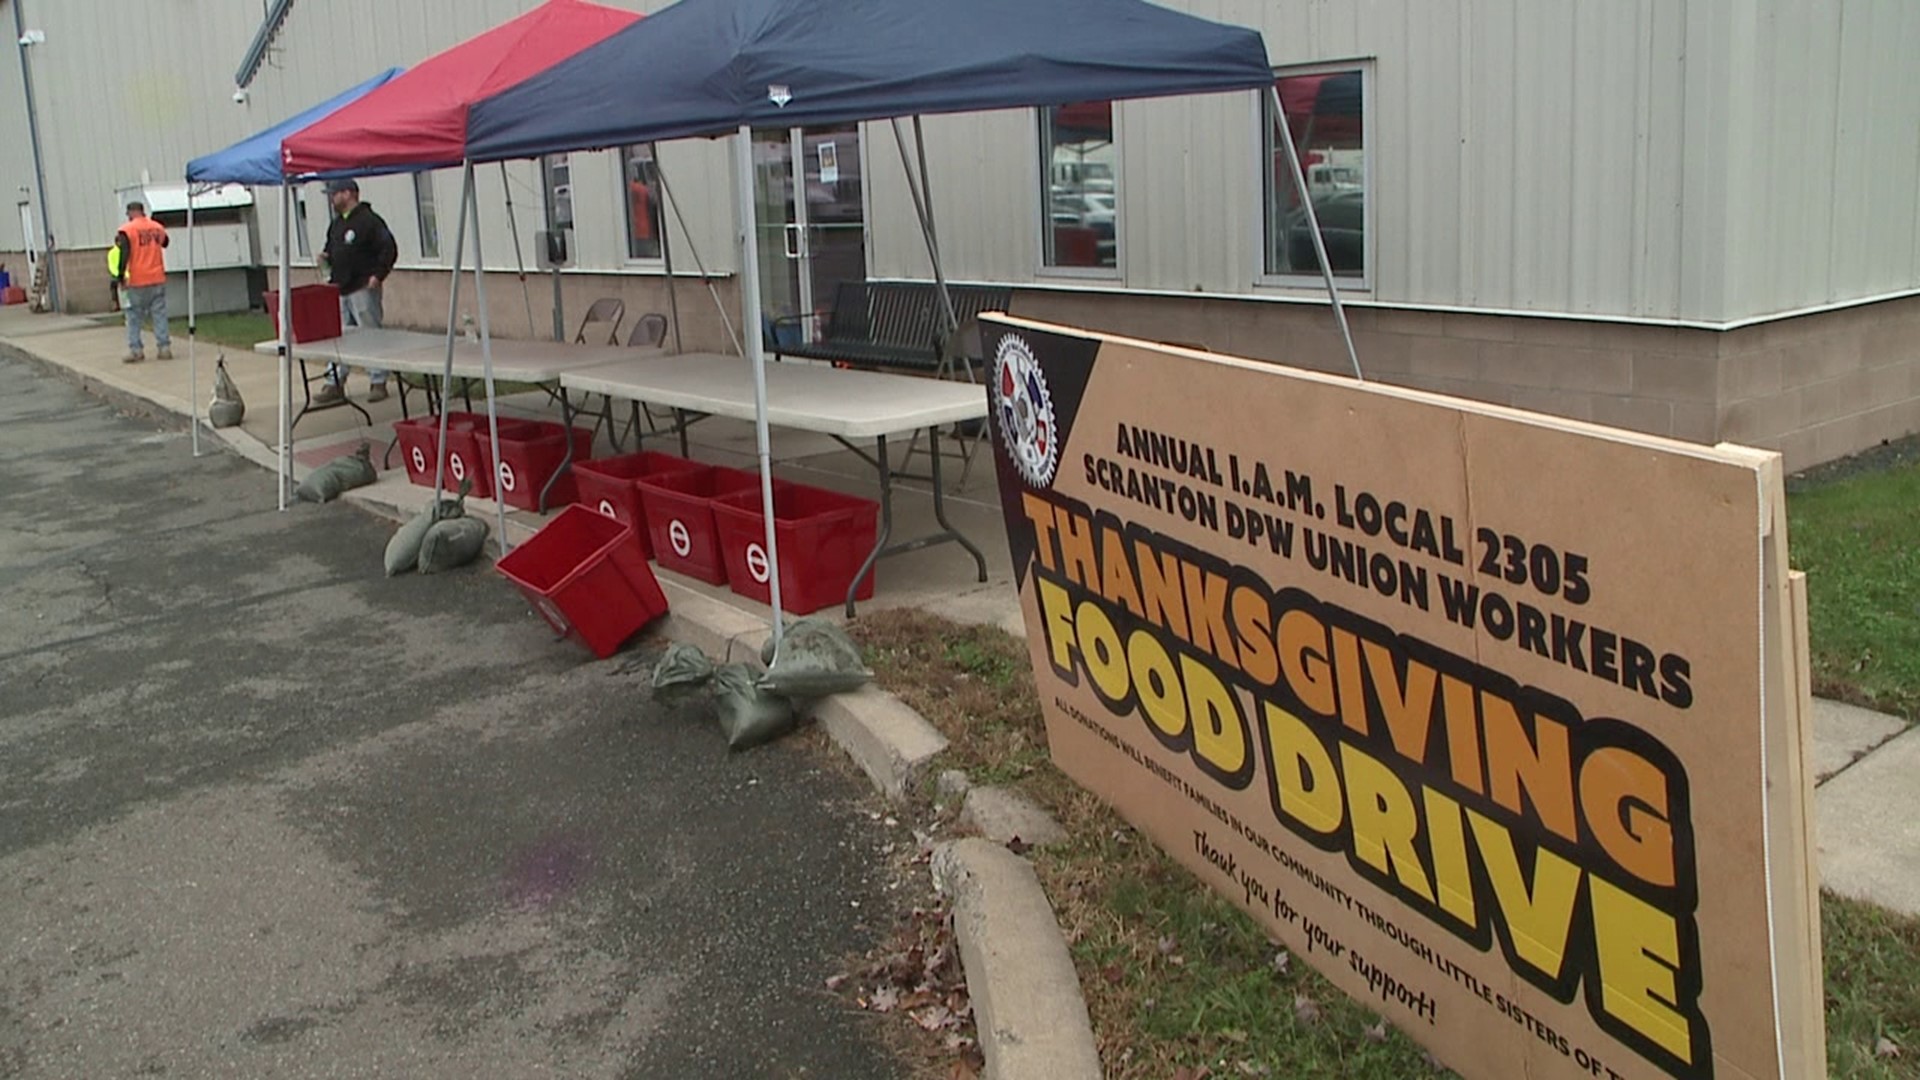 The food drive runs through Sunday as well as next weekend from 11 a.m. to 6 p.m. in Scranton.